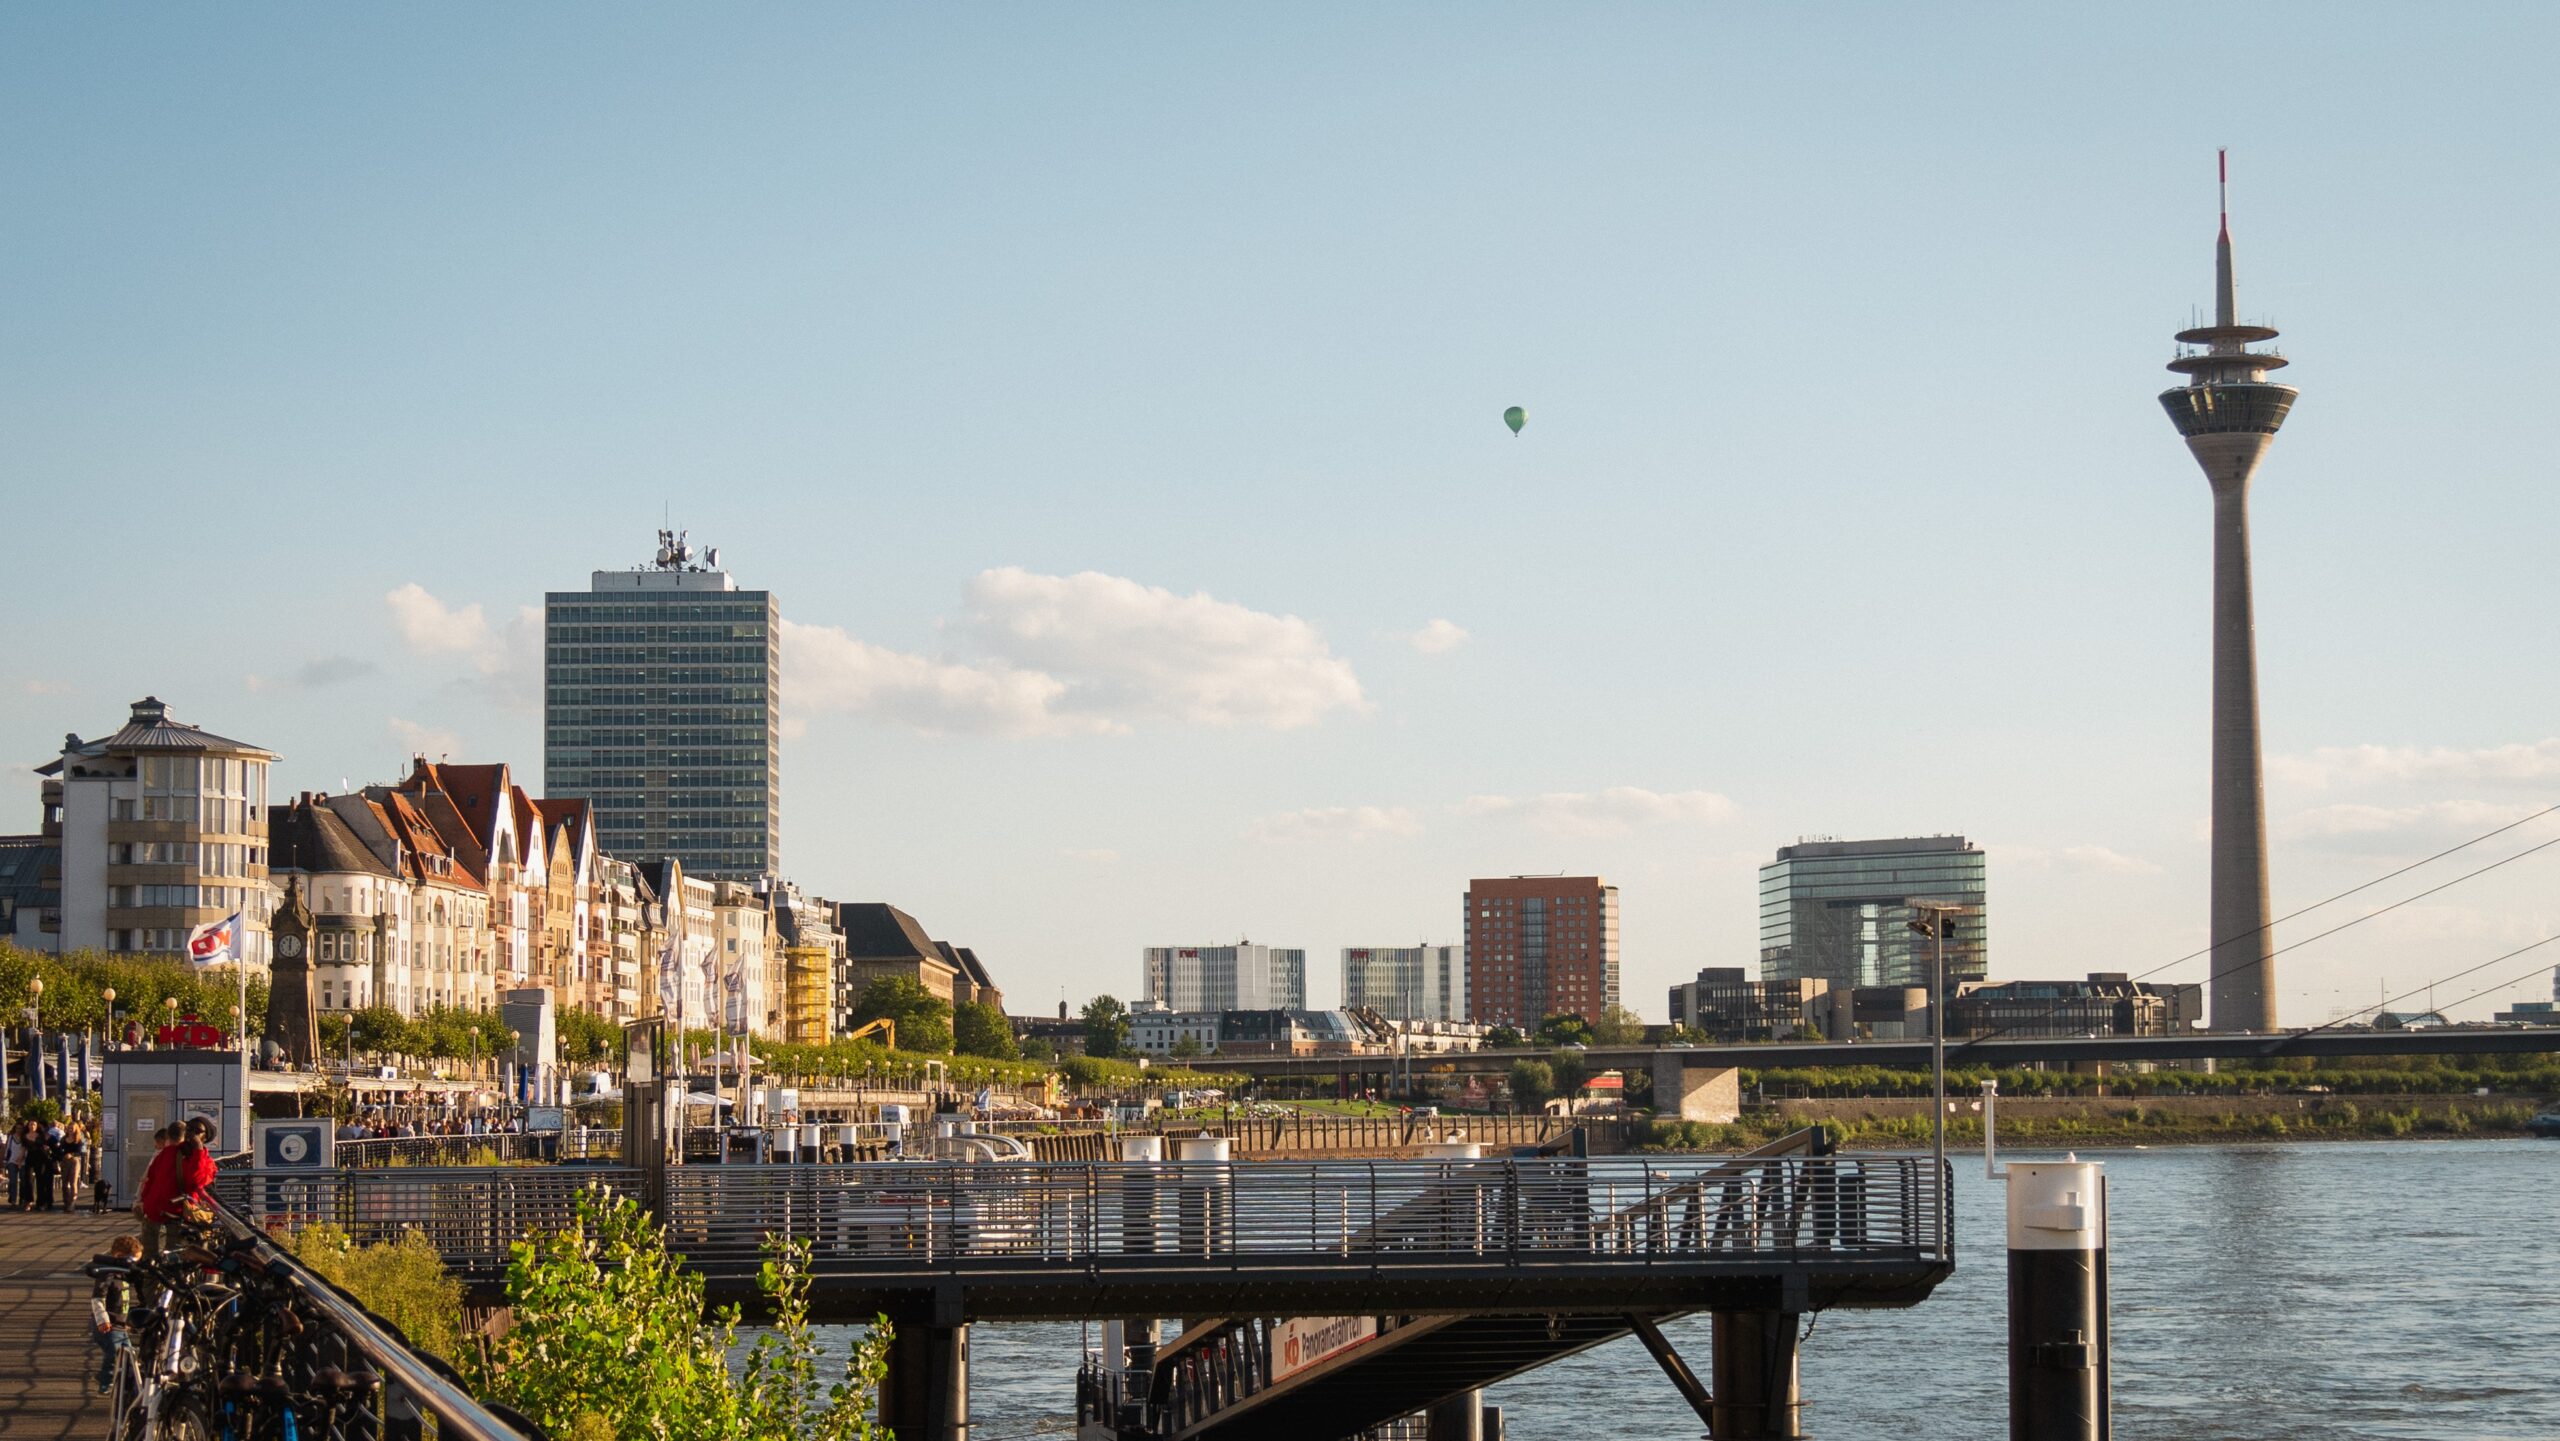 The City Guide to Düsseldorf: the skyline of the city